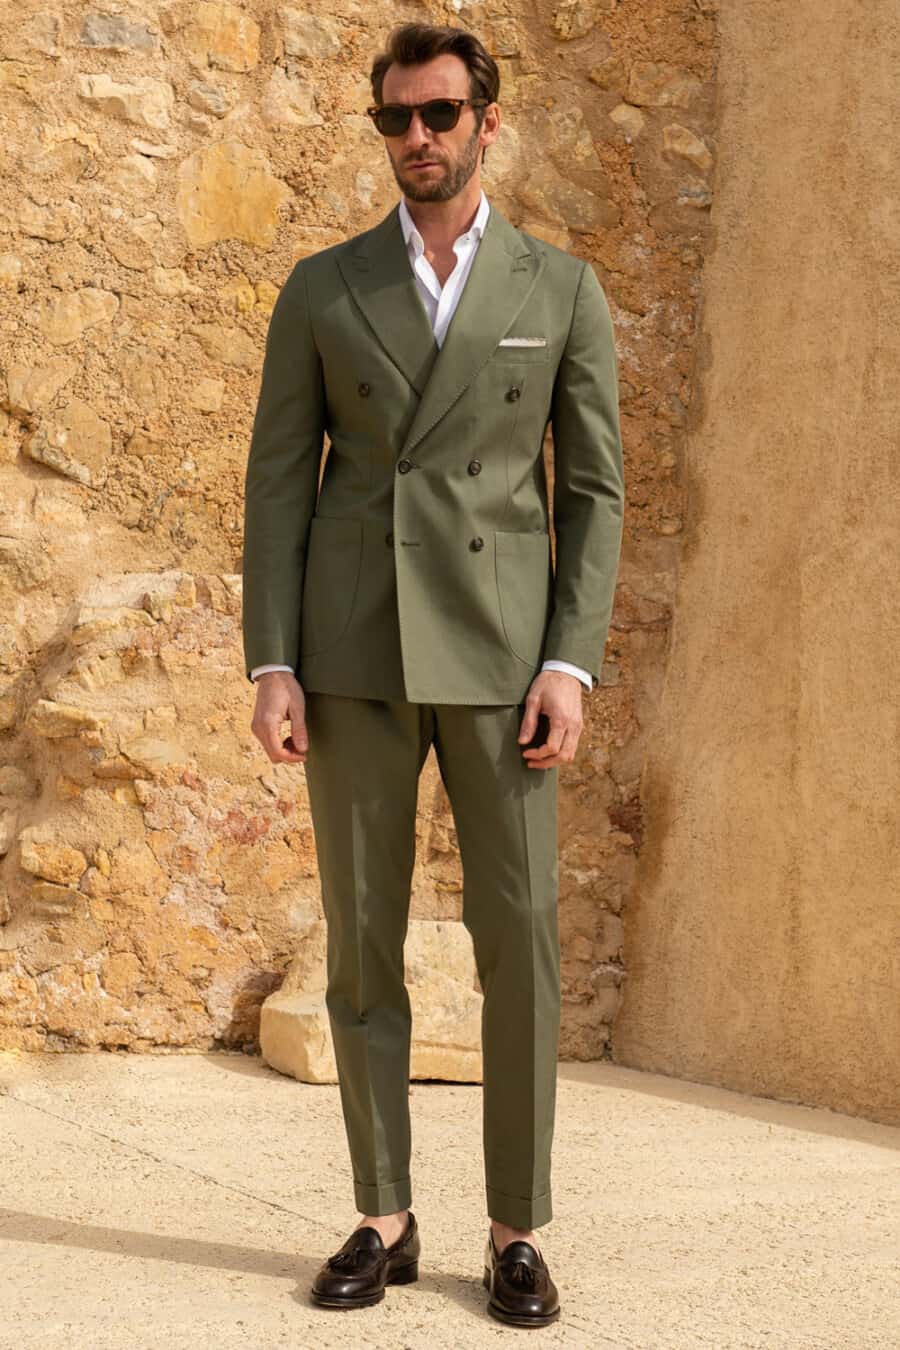 Green double-breasted suit, white shirt, tortoiseshell sunglasses and dark brown leather tassel loafers worn sockless outfit